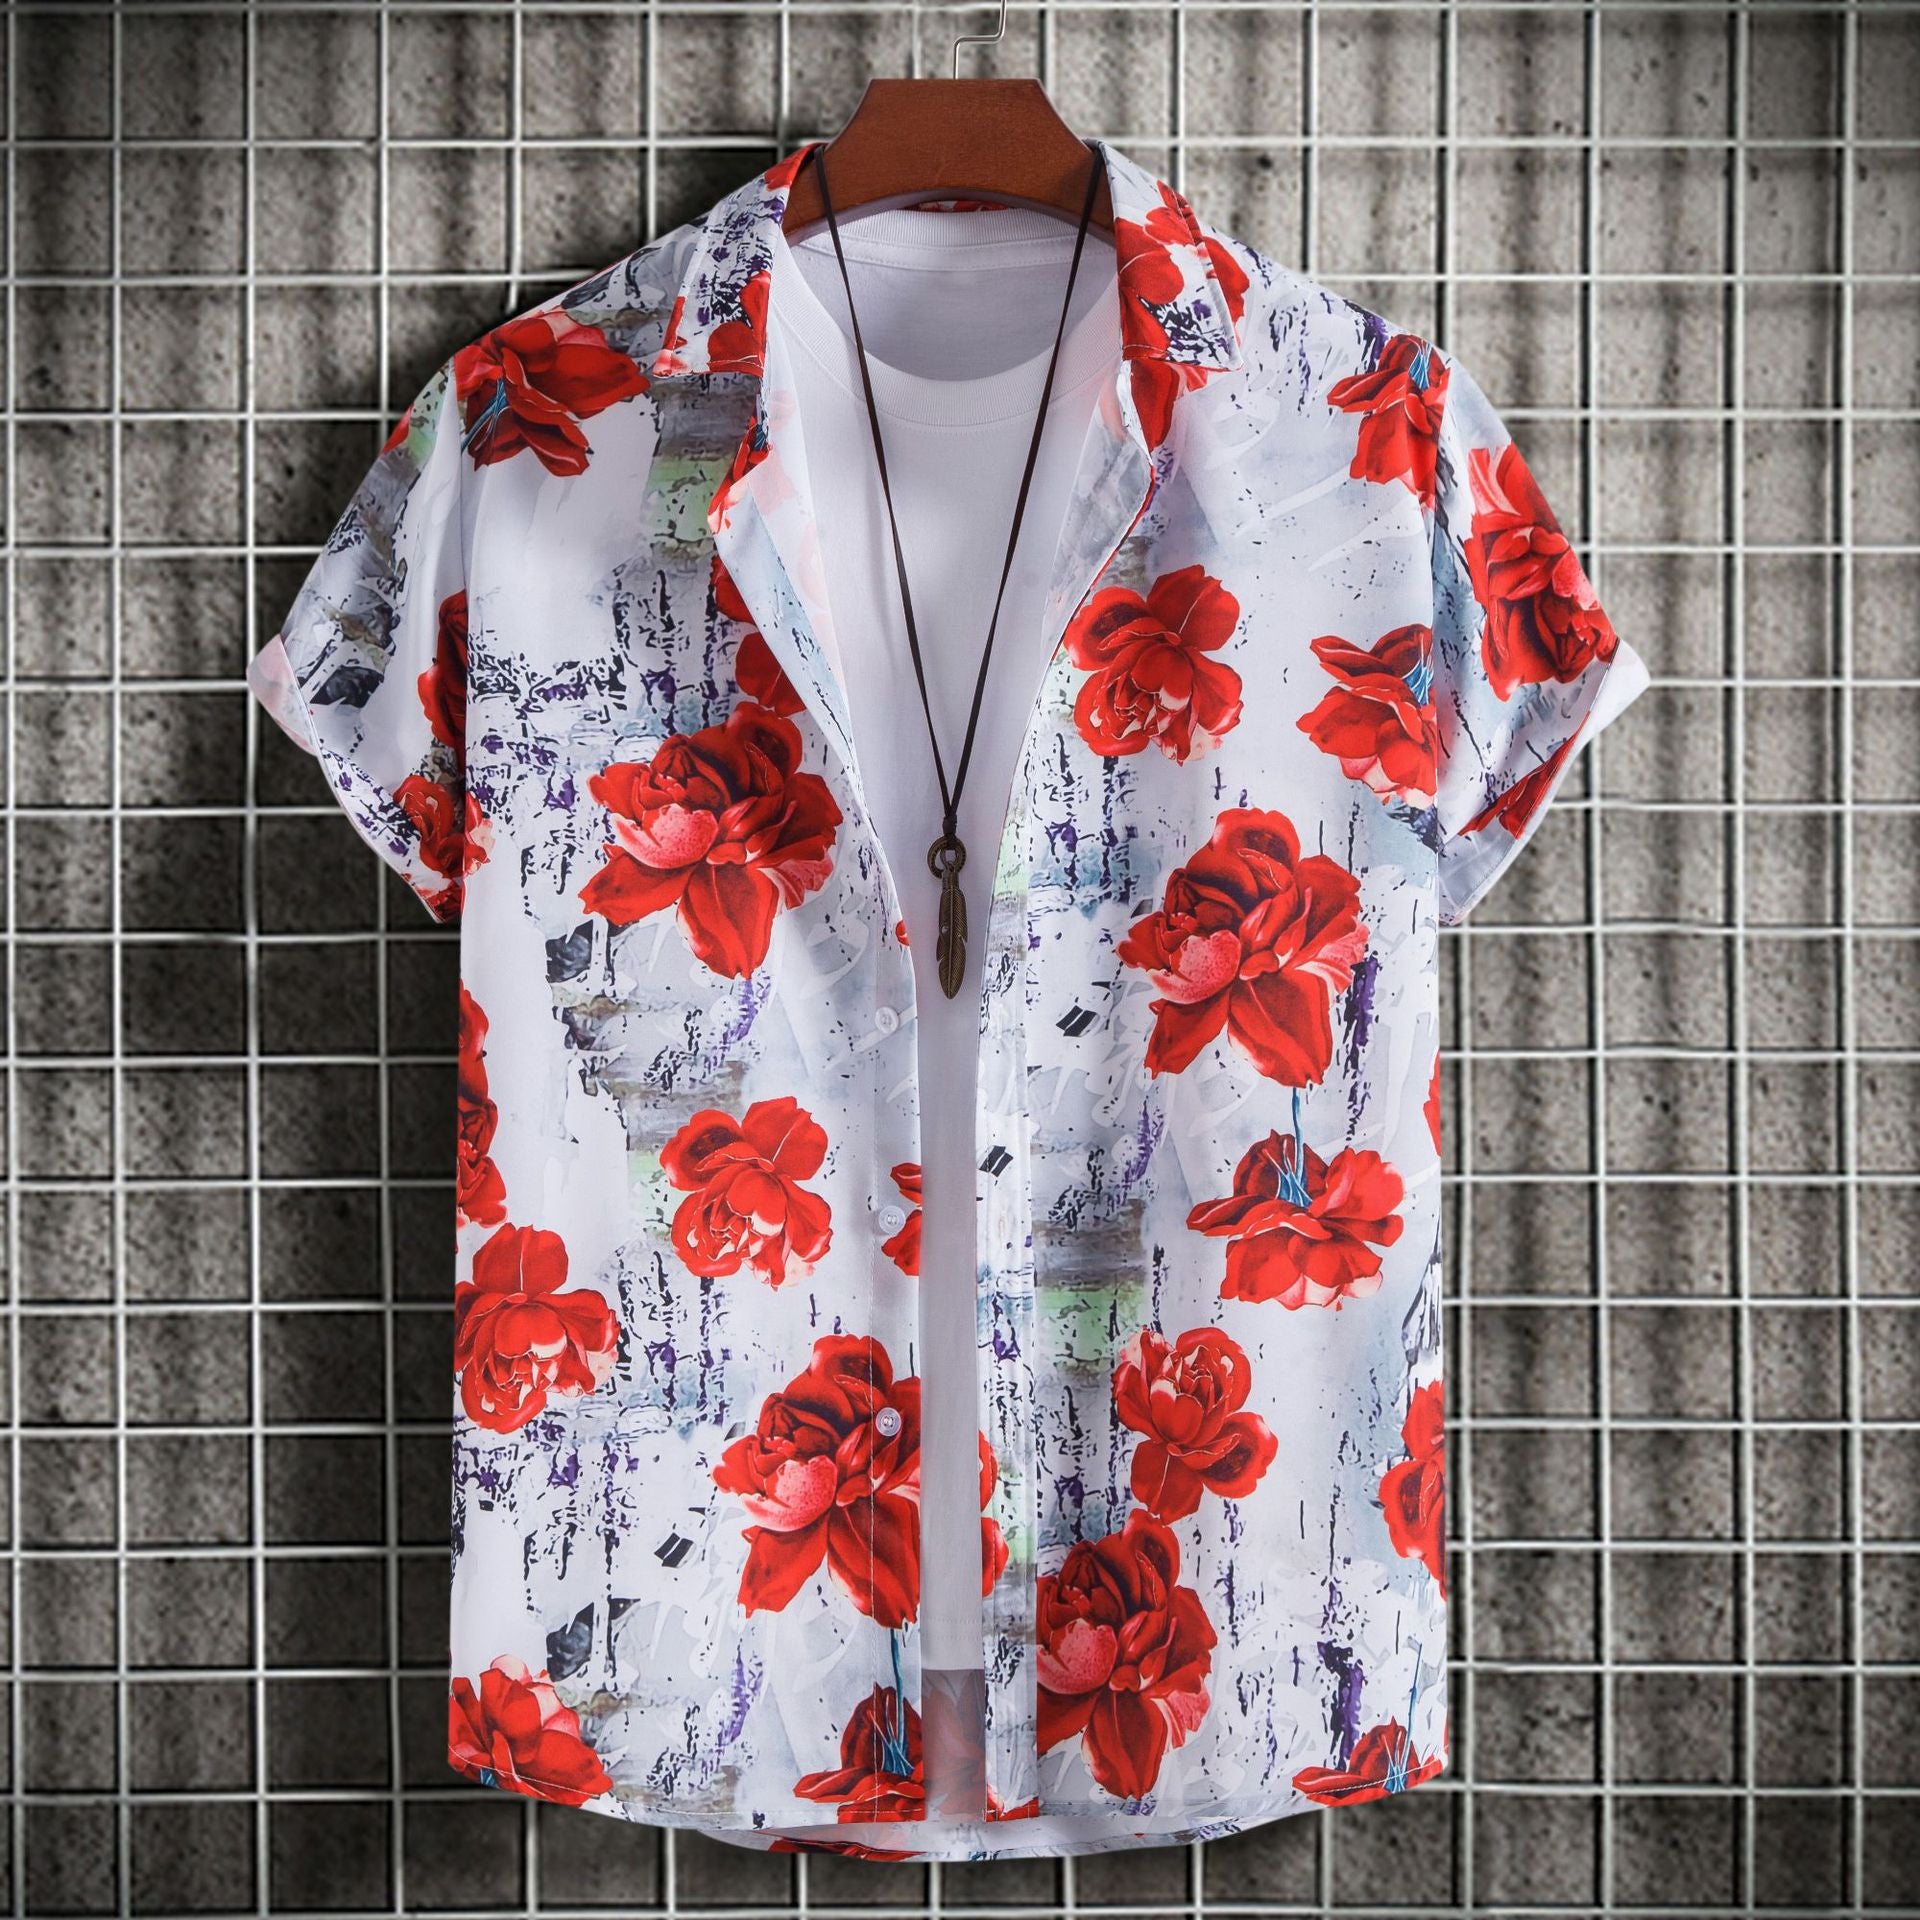 C229 - Men's Fashion Slim-fit Printed Short Sleeve Button Up Shirts - mens button up shirt at TFC&H Co.